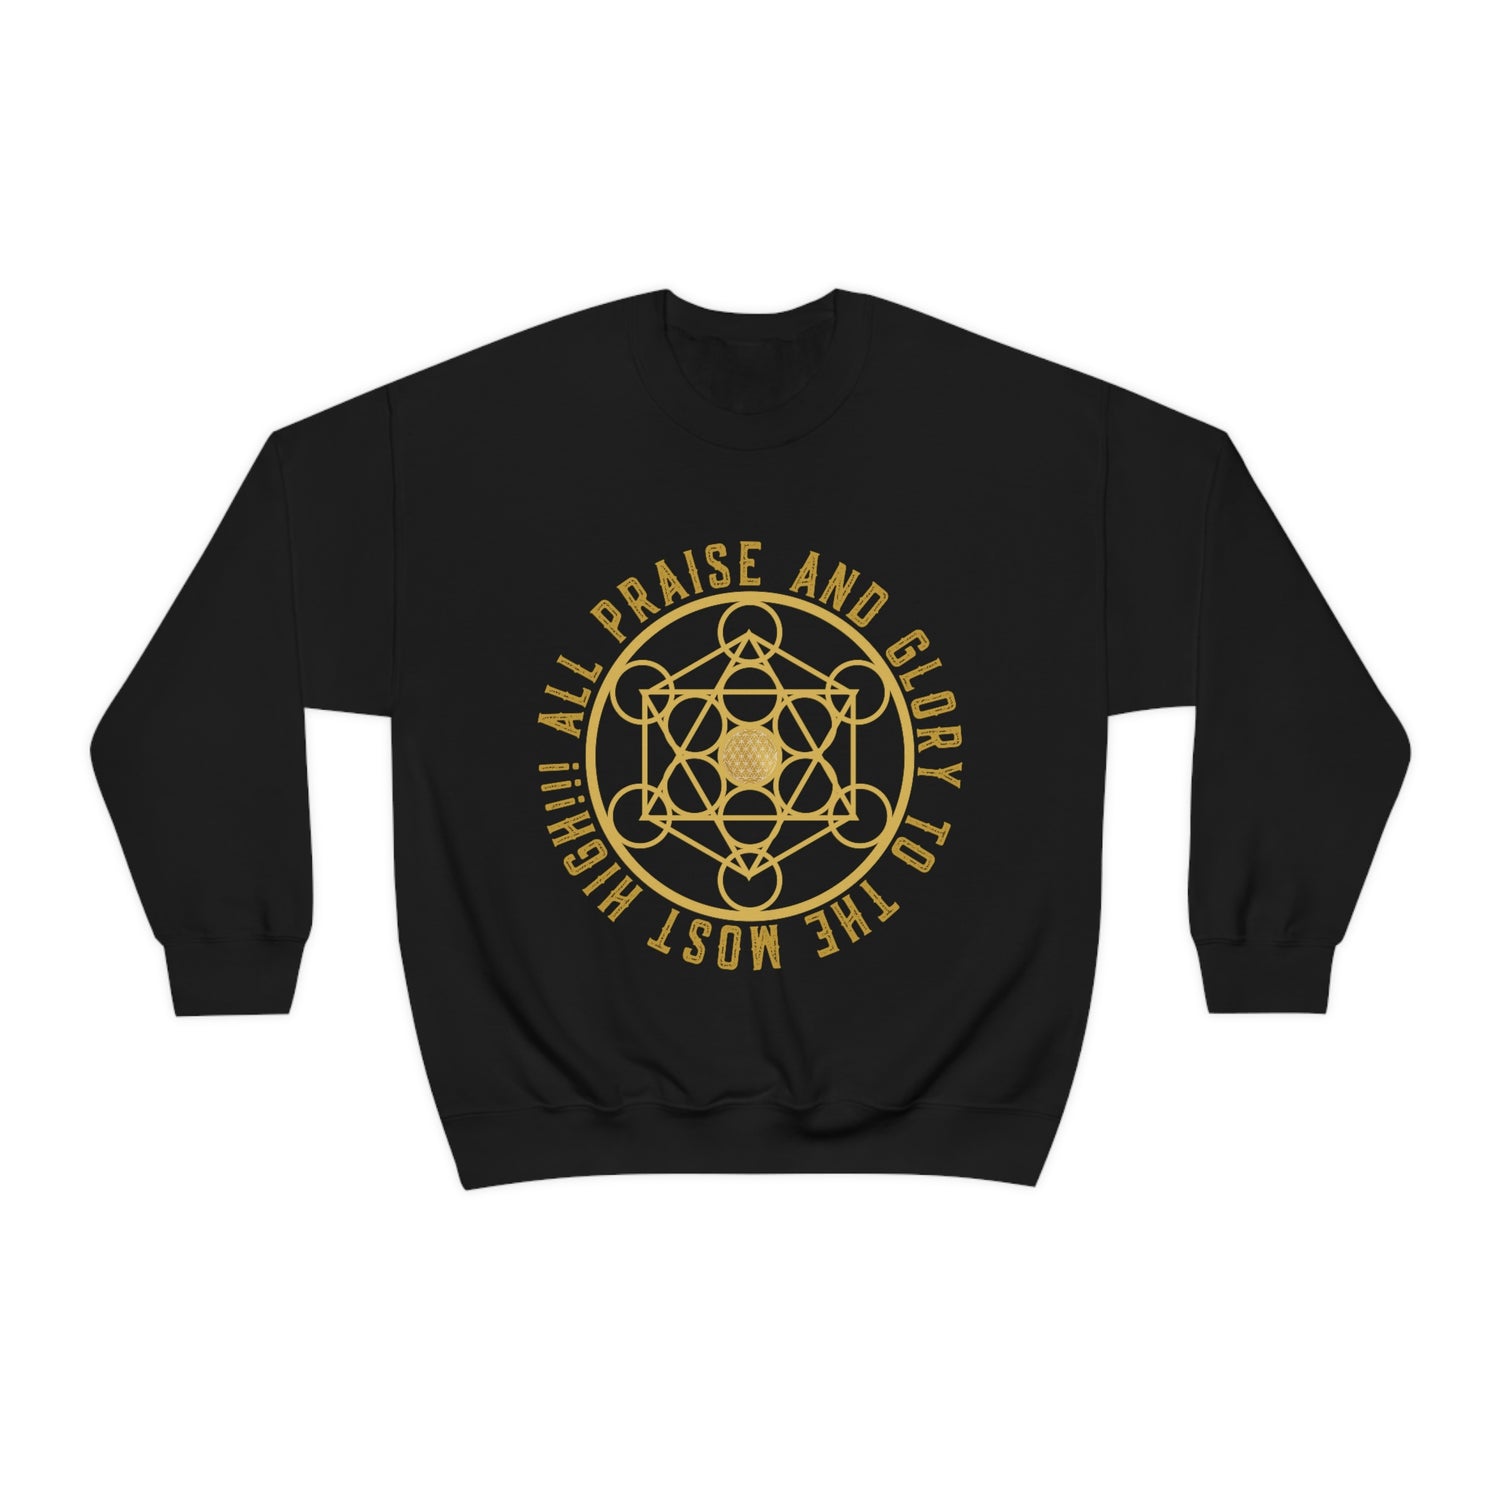 ALL PRAISE AND GLORY TO THE MOST HIGH!!! - Unisex Heavy Blend™ Crewneck Sweatshirt